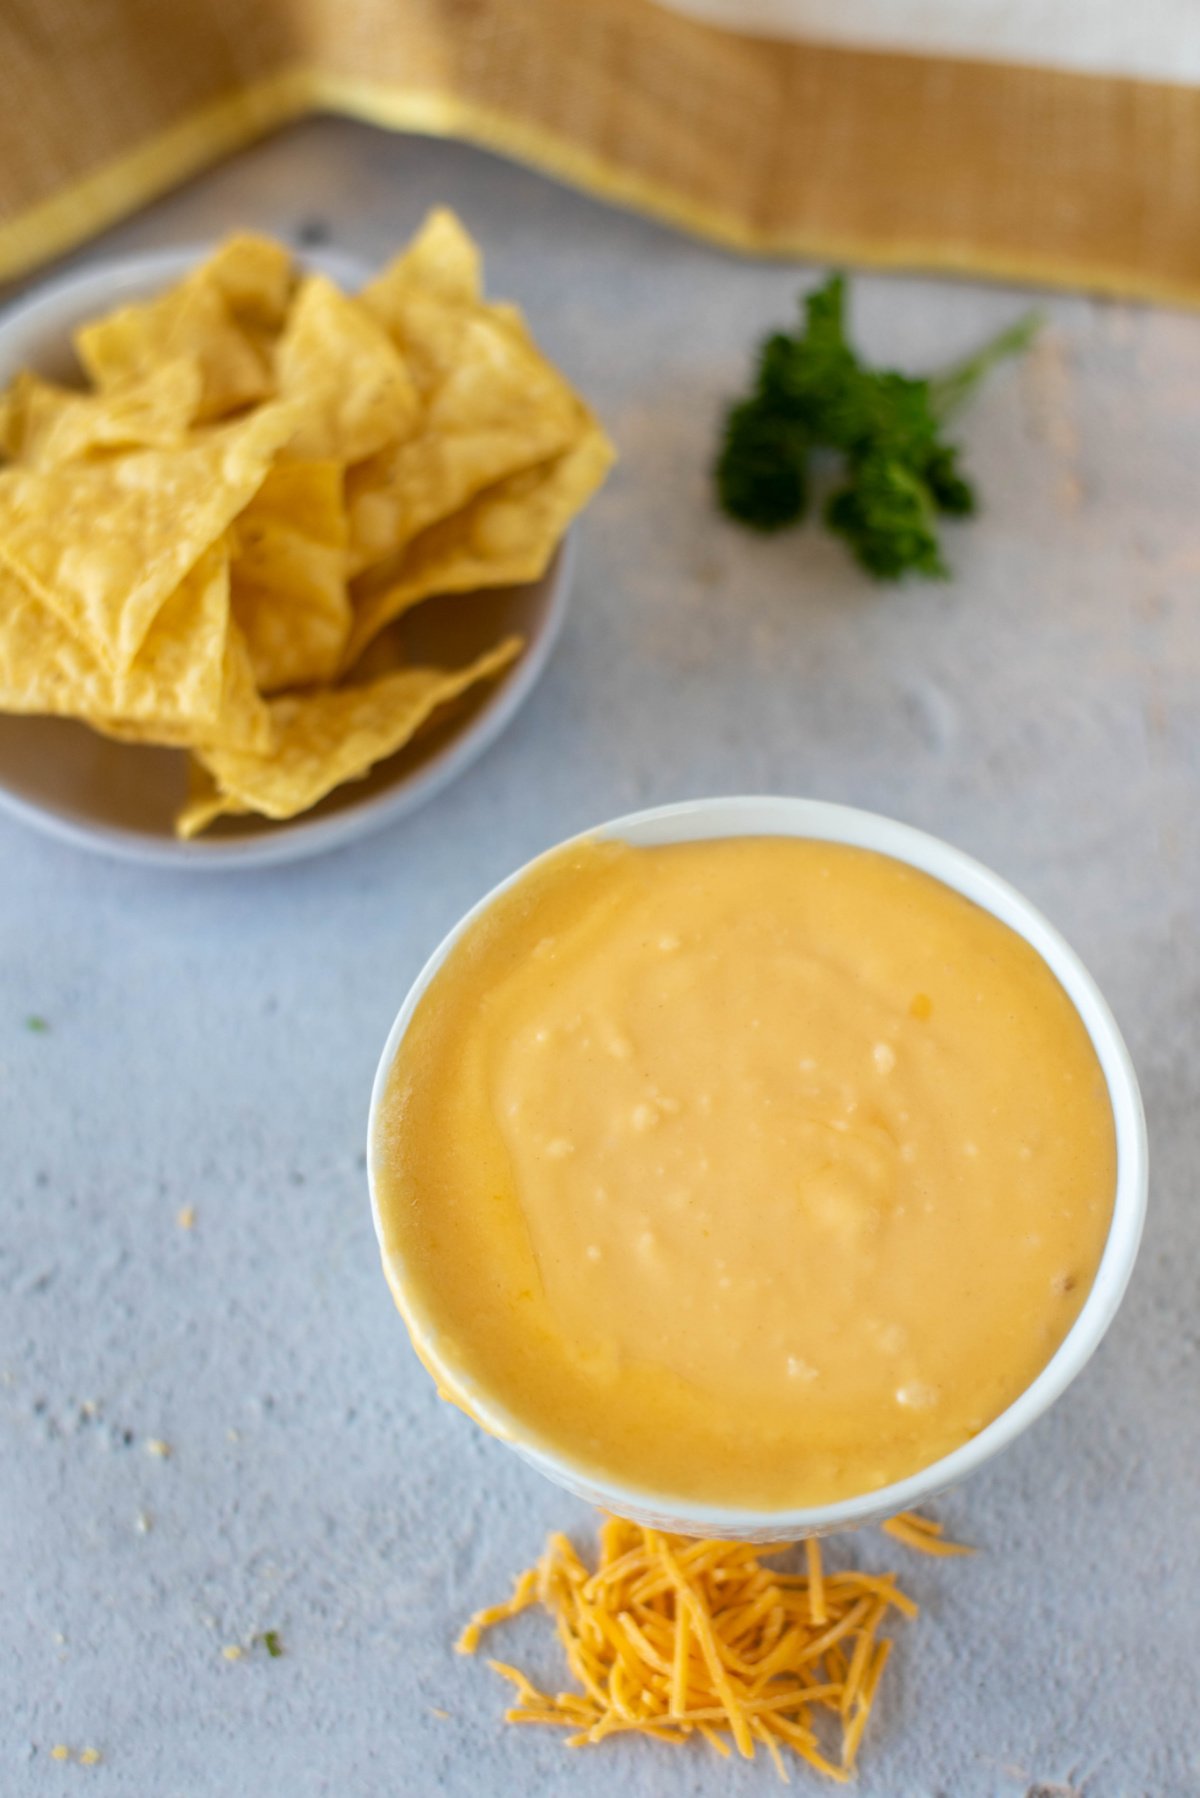 A bowl of cheese sauce next to a bowl of chips on a counter